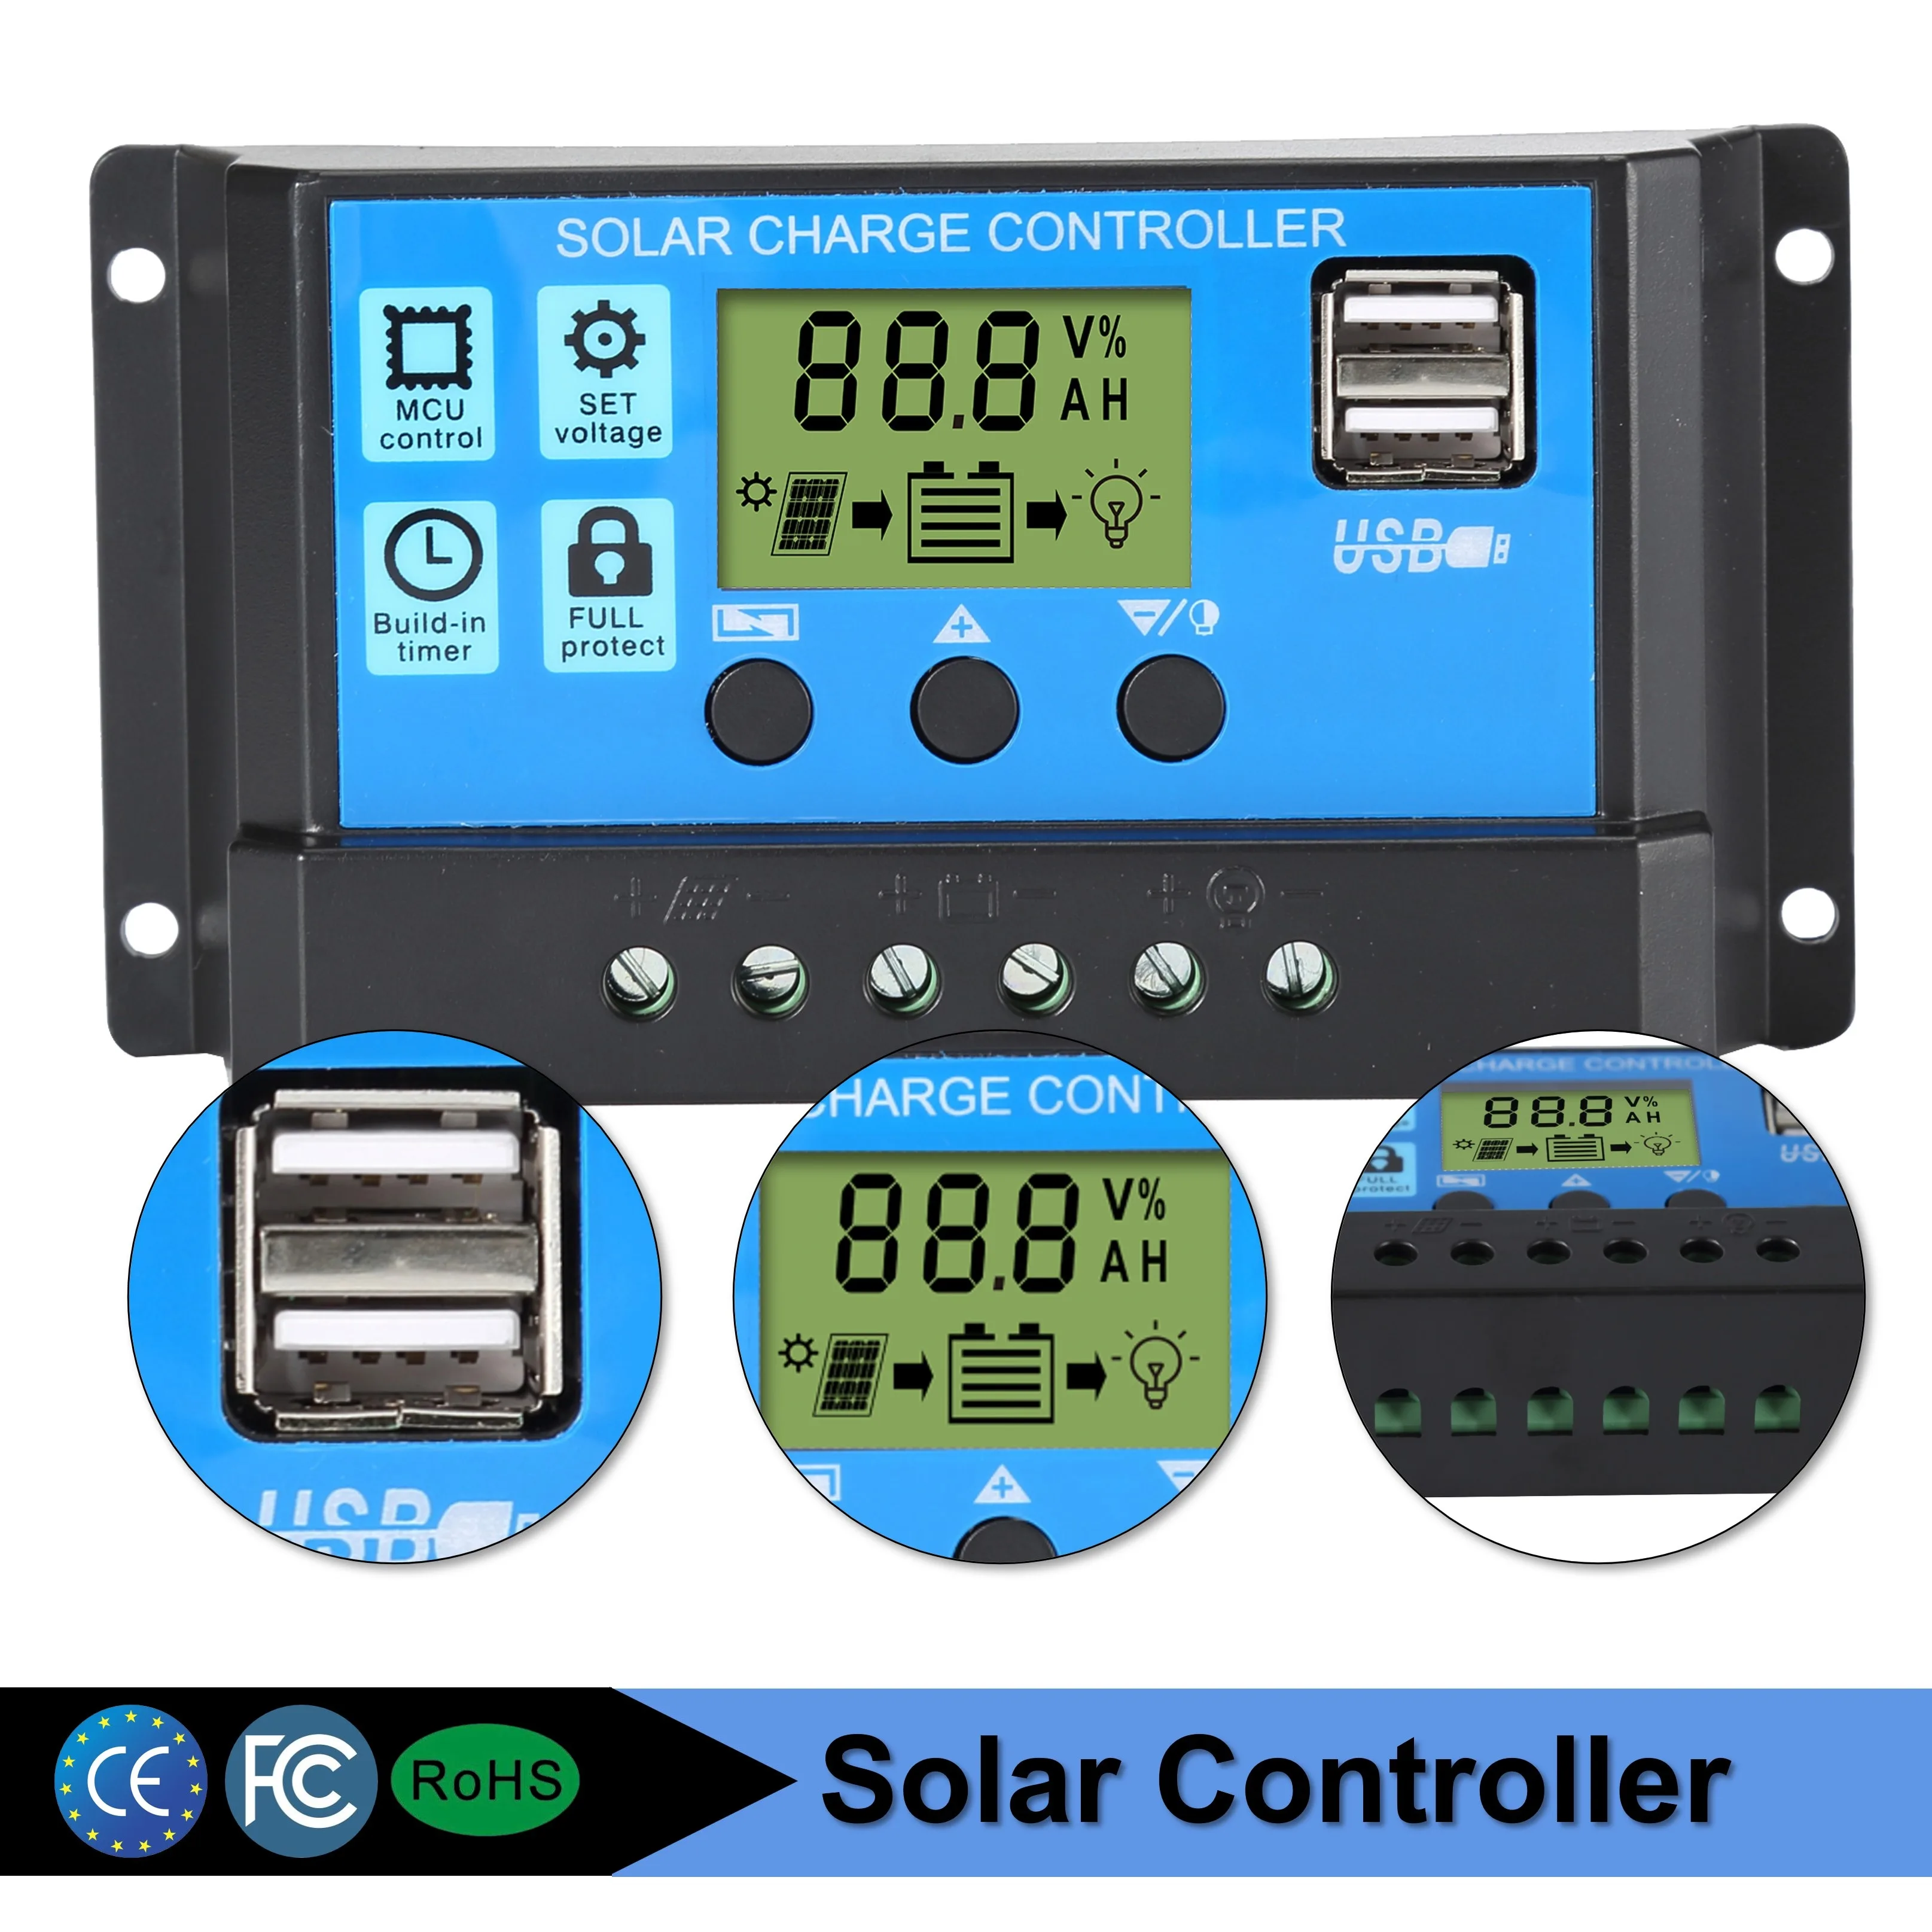 LCD 30A Solar Panel Battery Charge Controller Regulator Auto Adapt 12V/24V /USB 